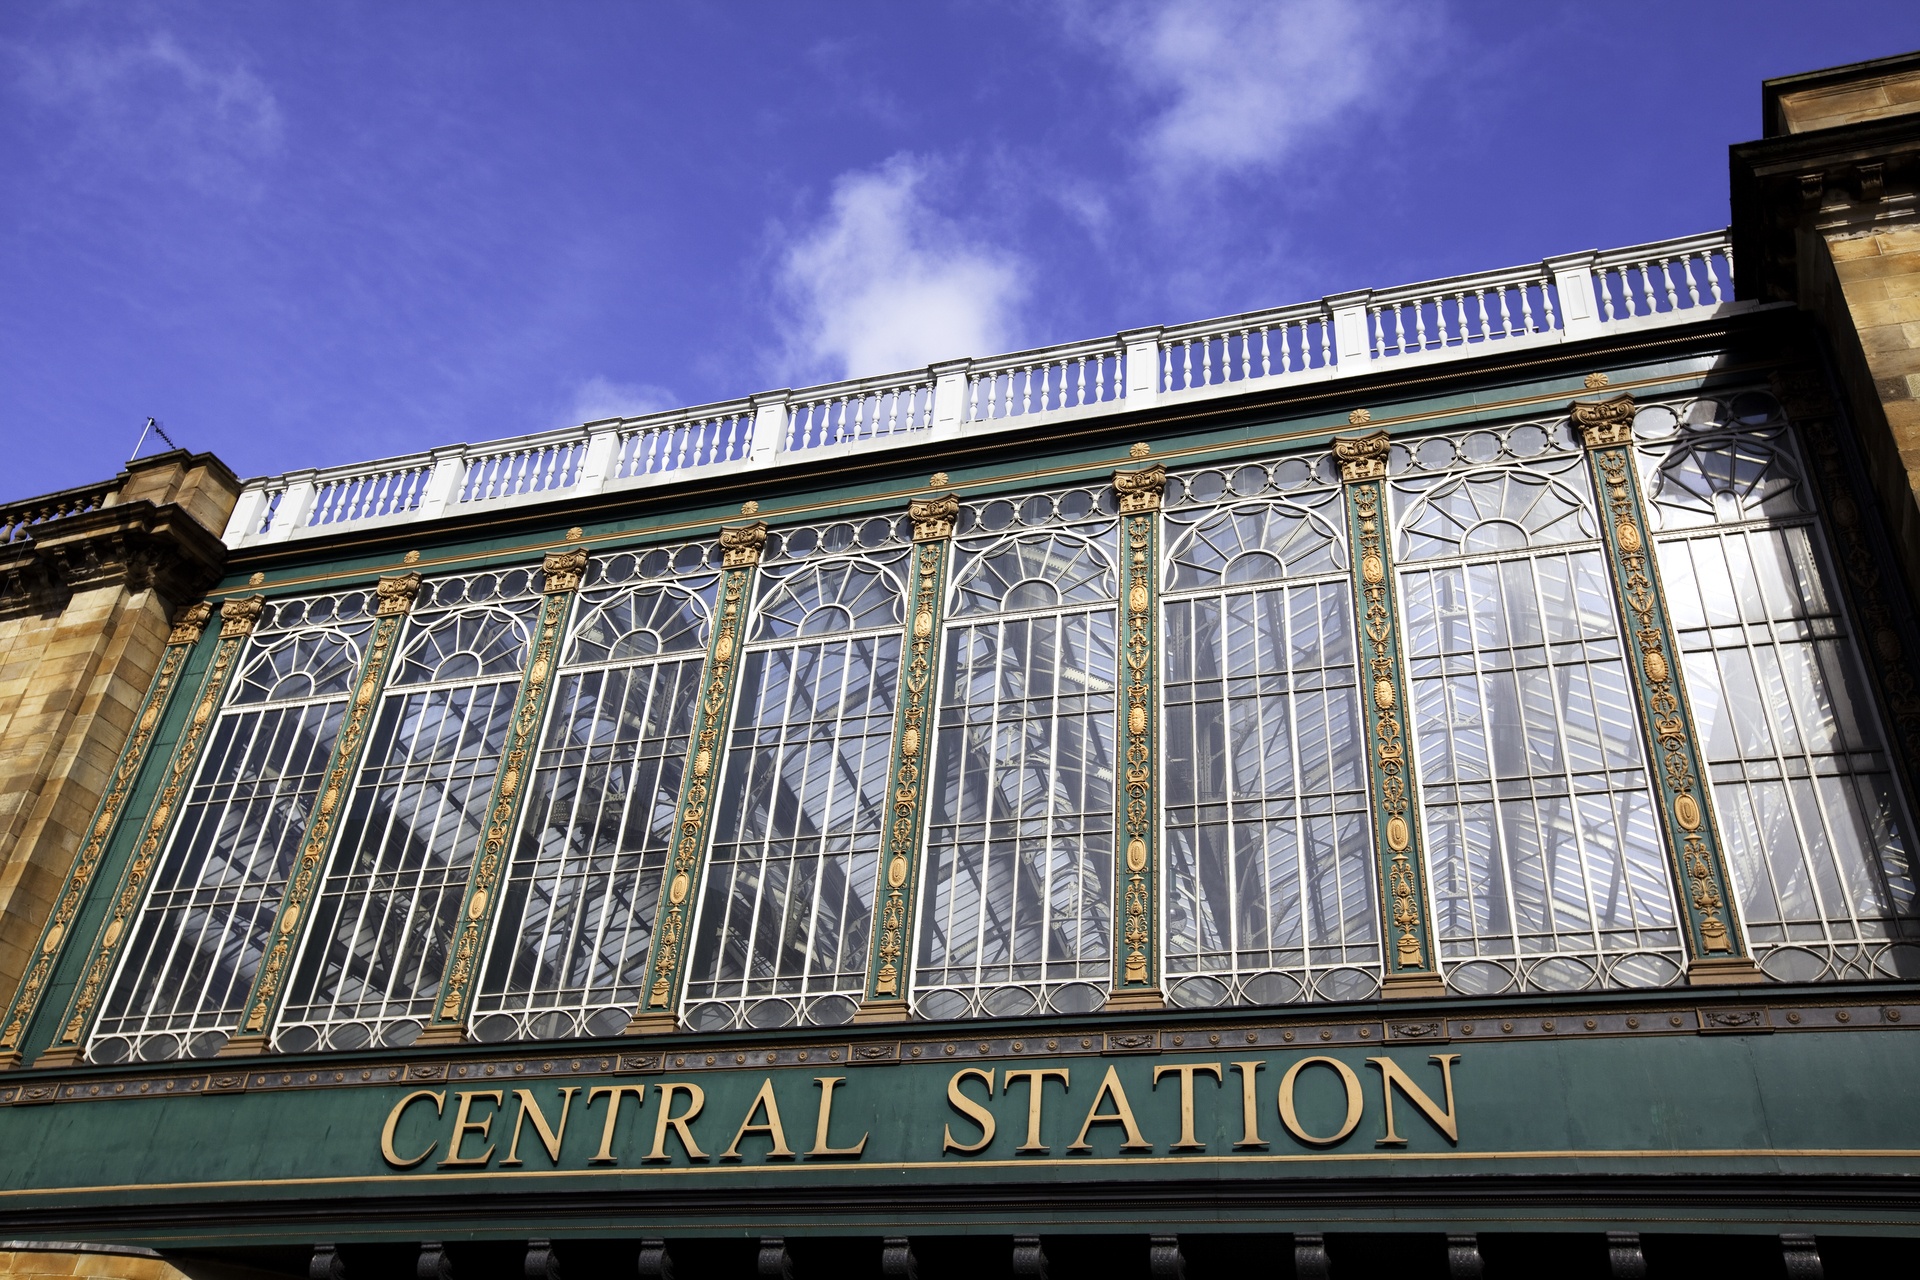 Glasgow Central is the busiest railway station in Scotland and the third busiest in Britain. The station opened in 1879.